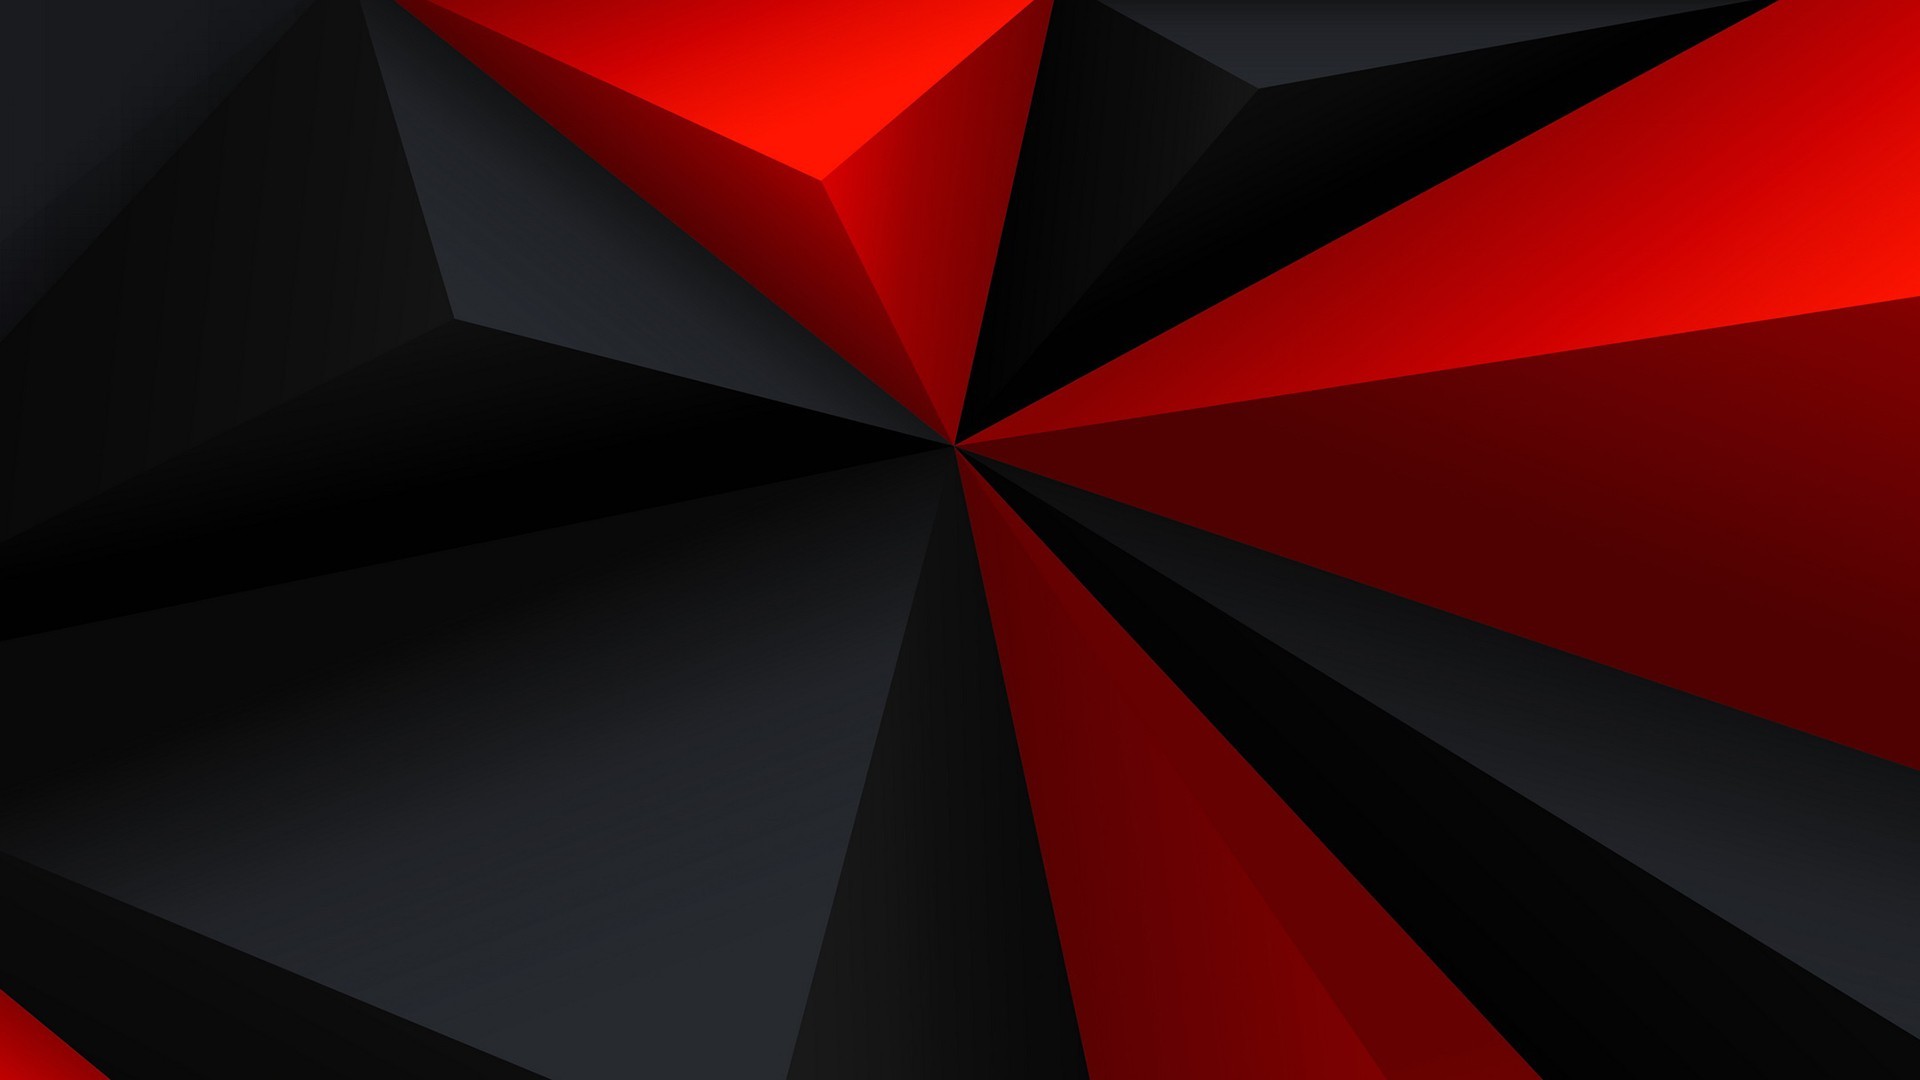 Abstract Computer Wallpapers, Desktop Backgrounds - Red Black Geometric Background - HD Wallpaper 